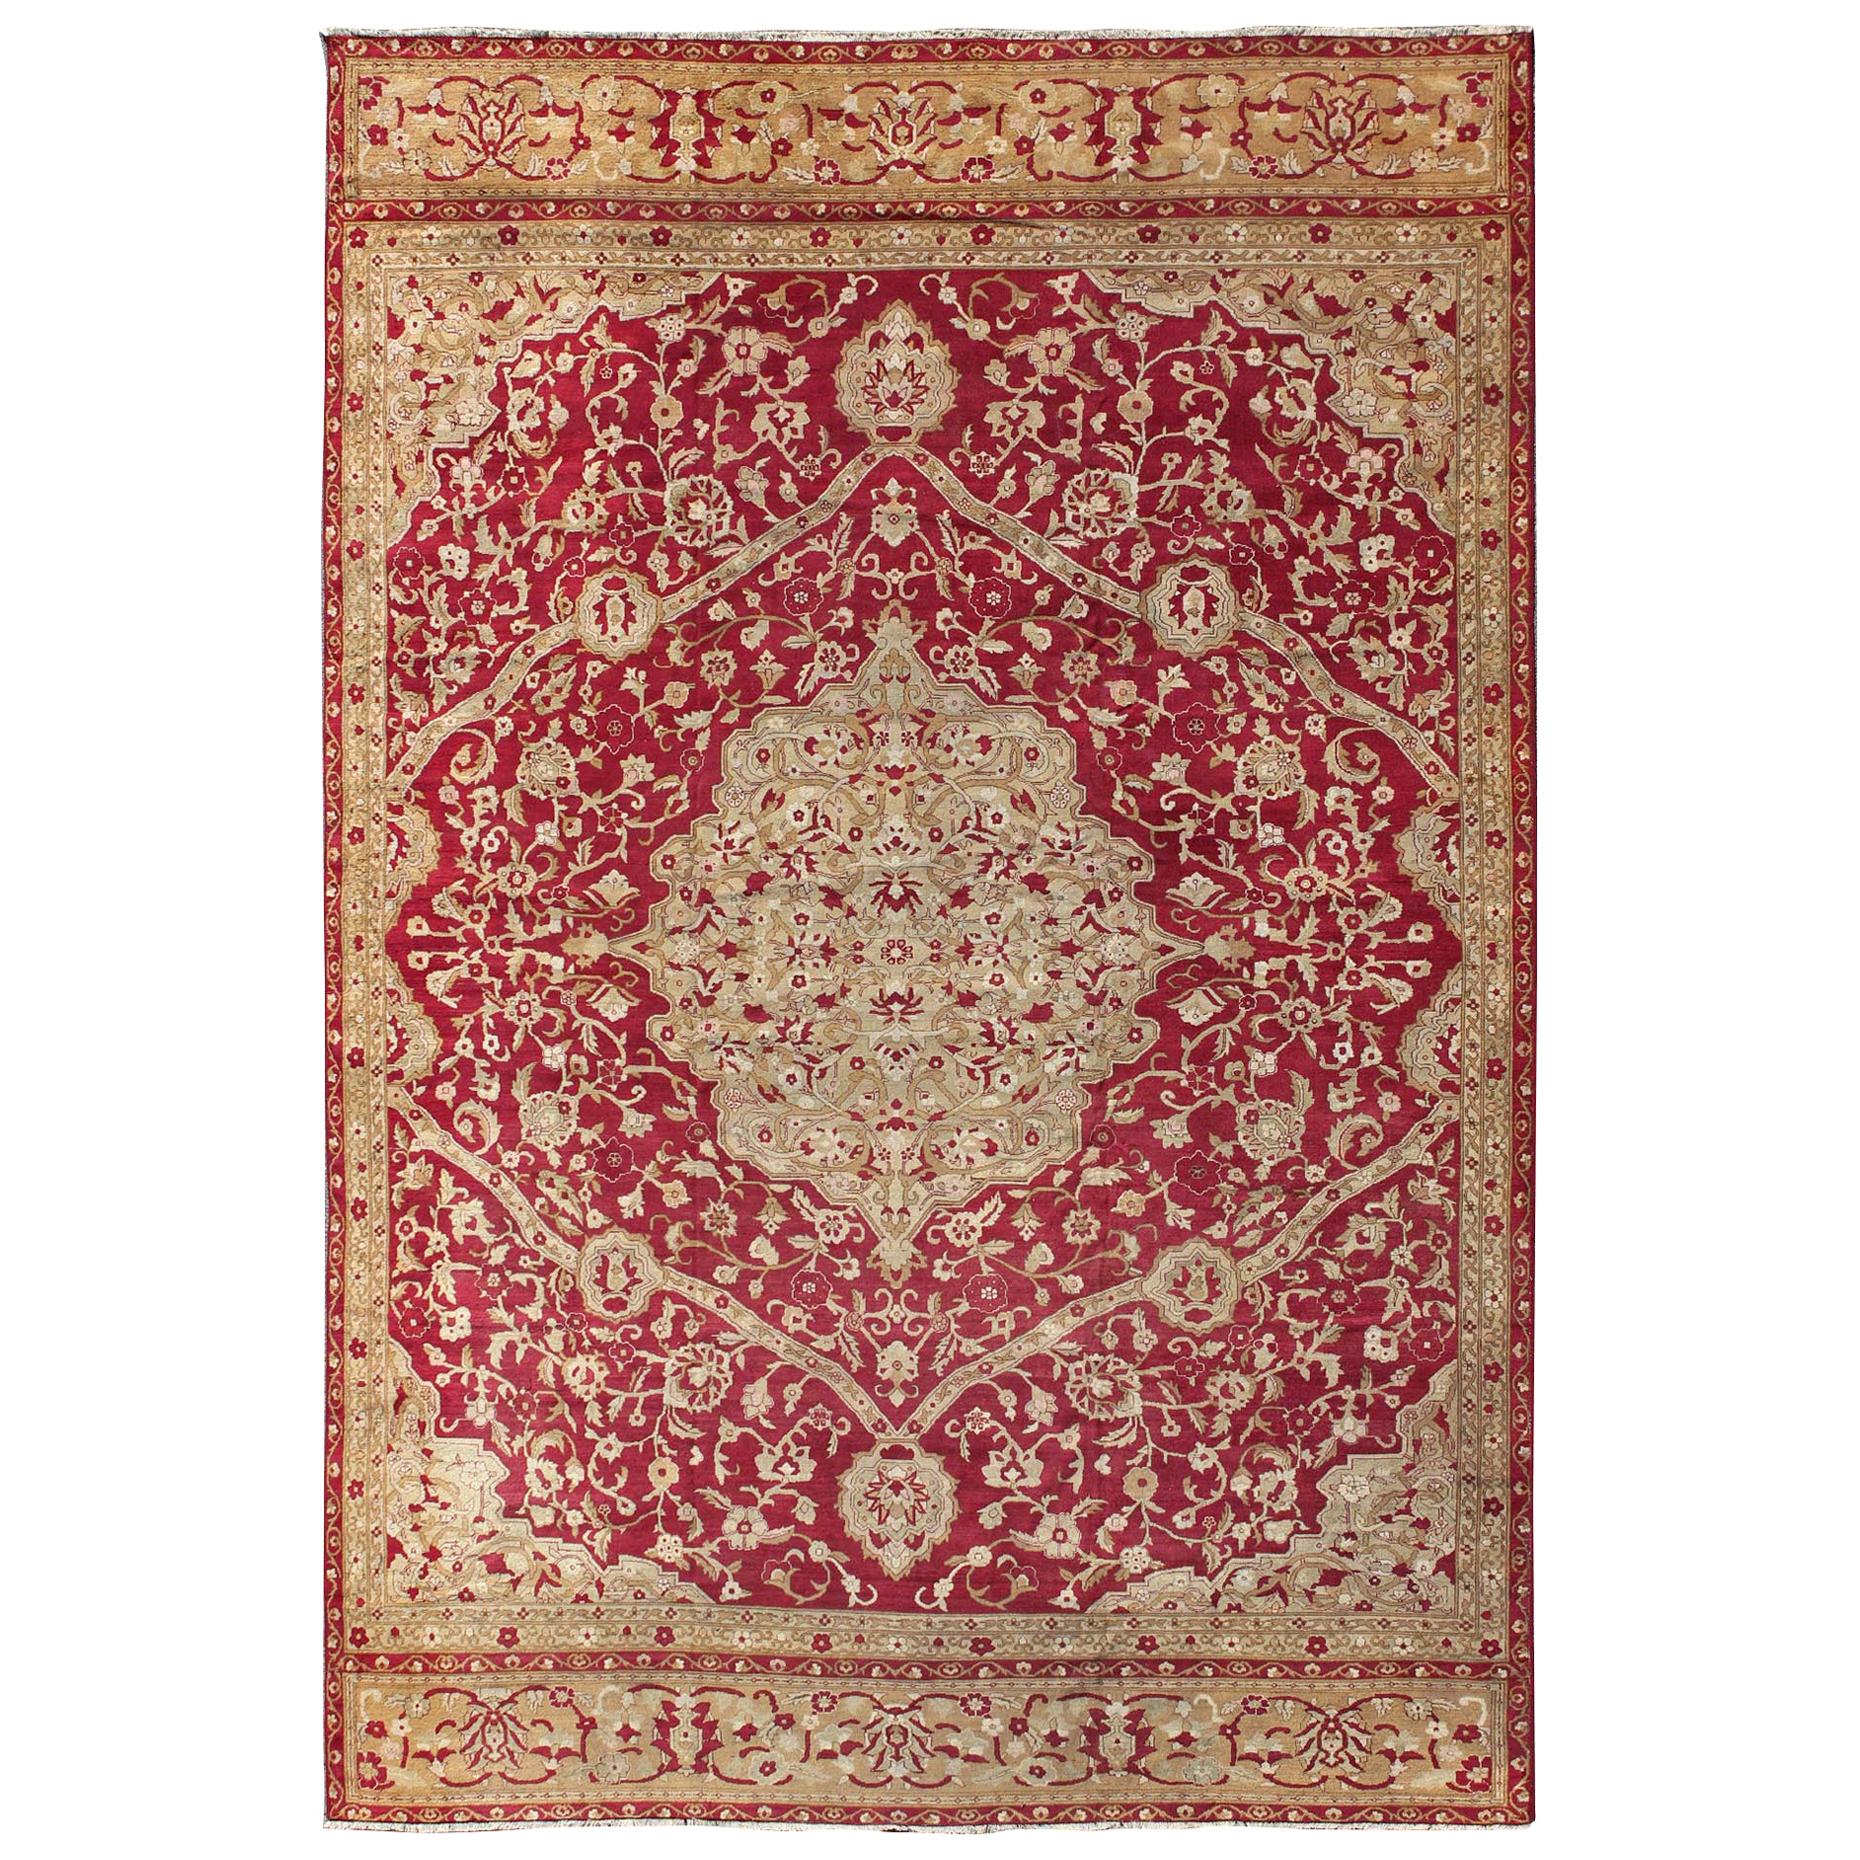 Large Antique Agra Carpet with Floral Design in Red, Taupe and Light Green 